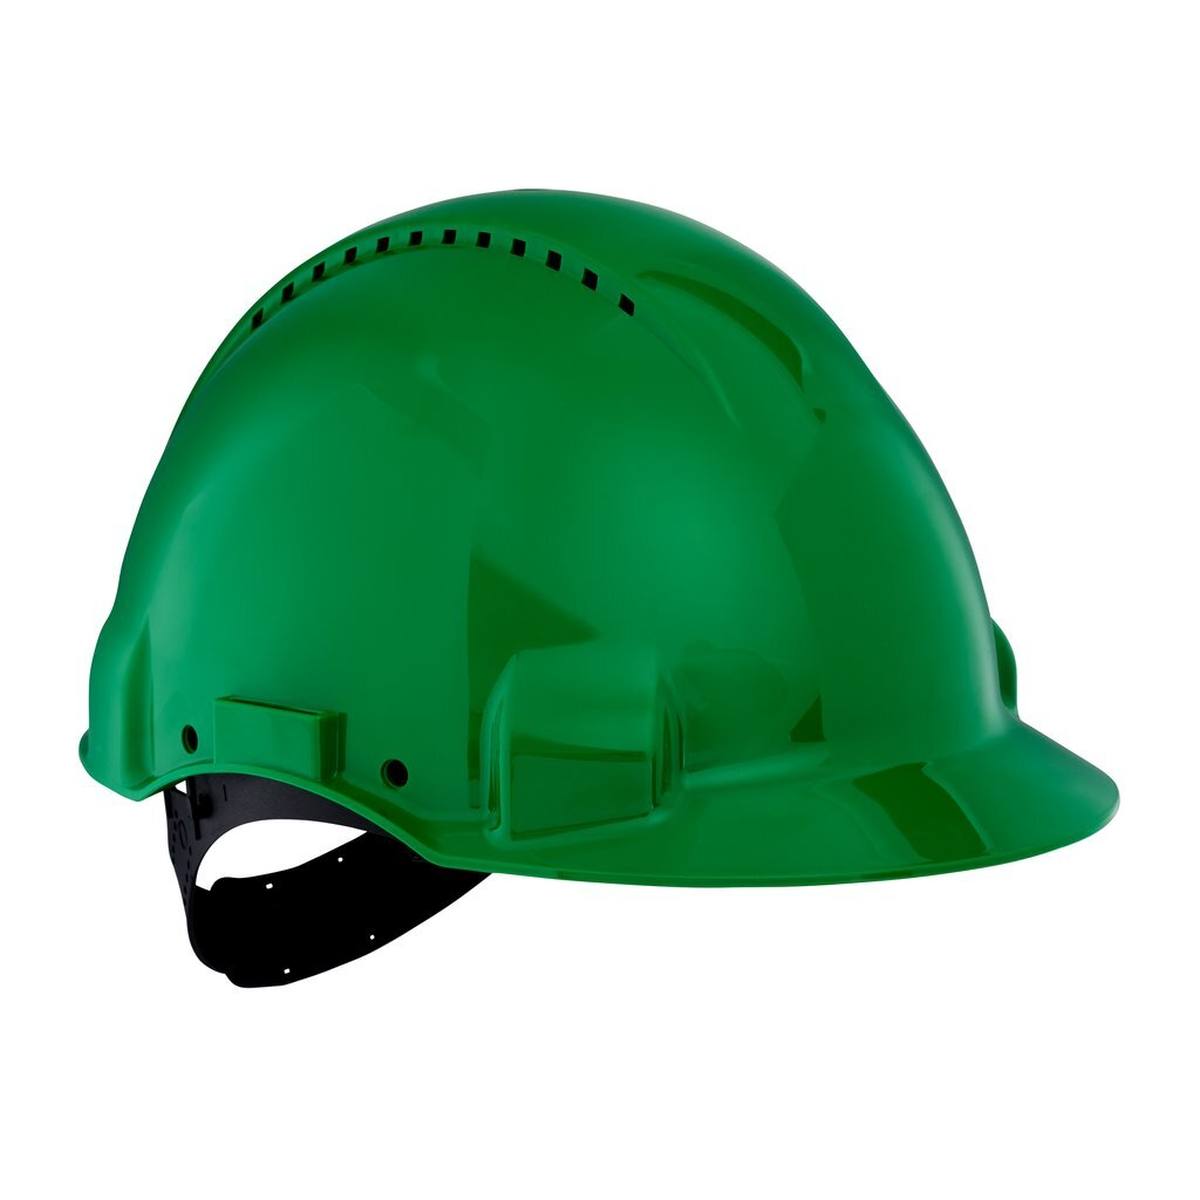 3M G3000 safety helmet G30CUG in green, ventilated, with uvicator, pinlock and plastic sweatband